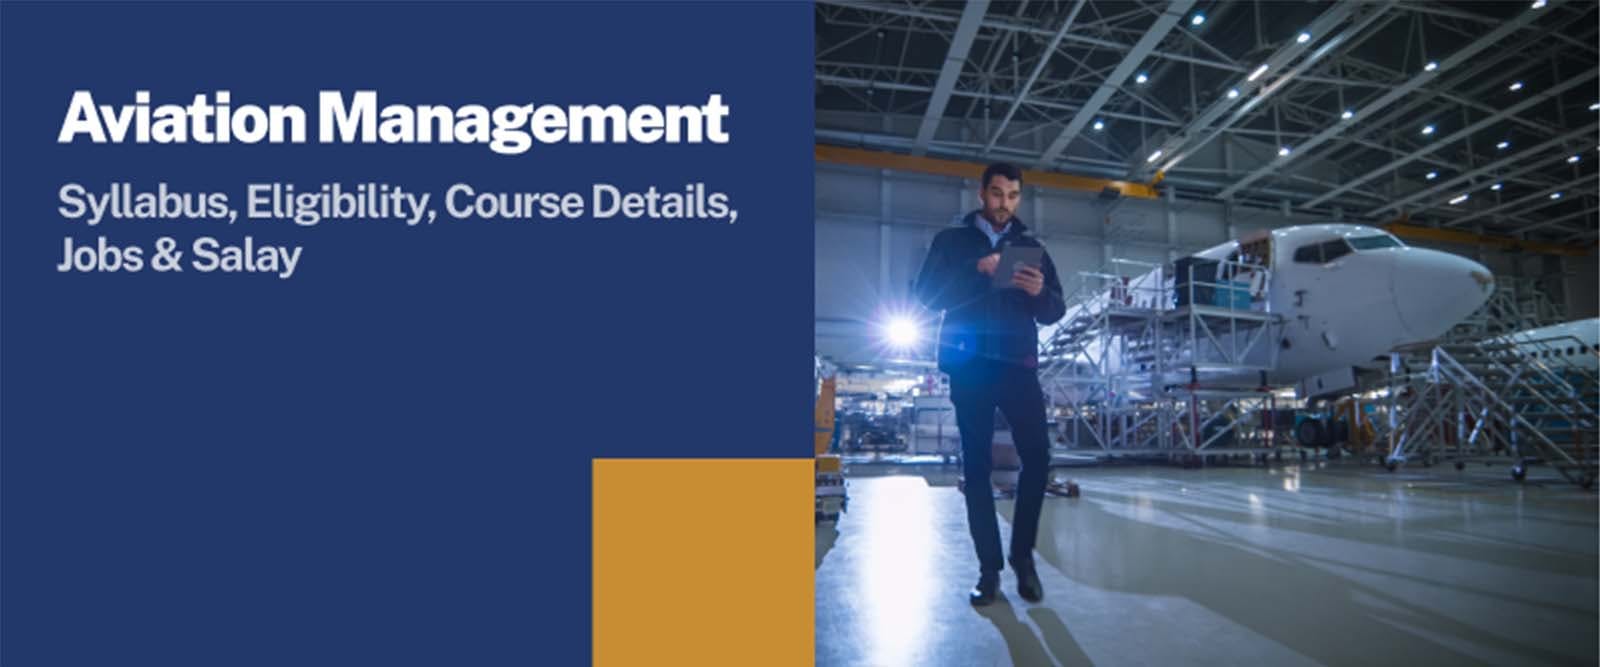 MBA in Aviation Management: Syllabus, Eligibility, Course Details, Jobs & Salary